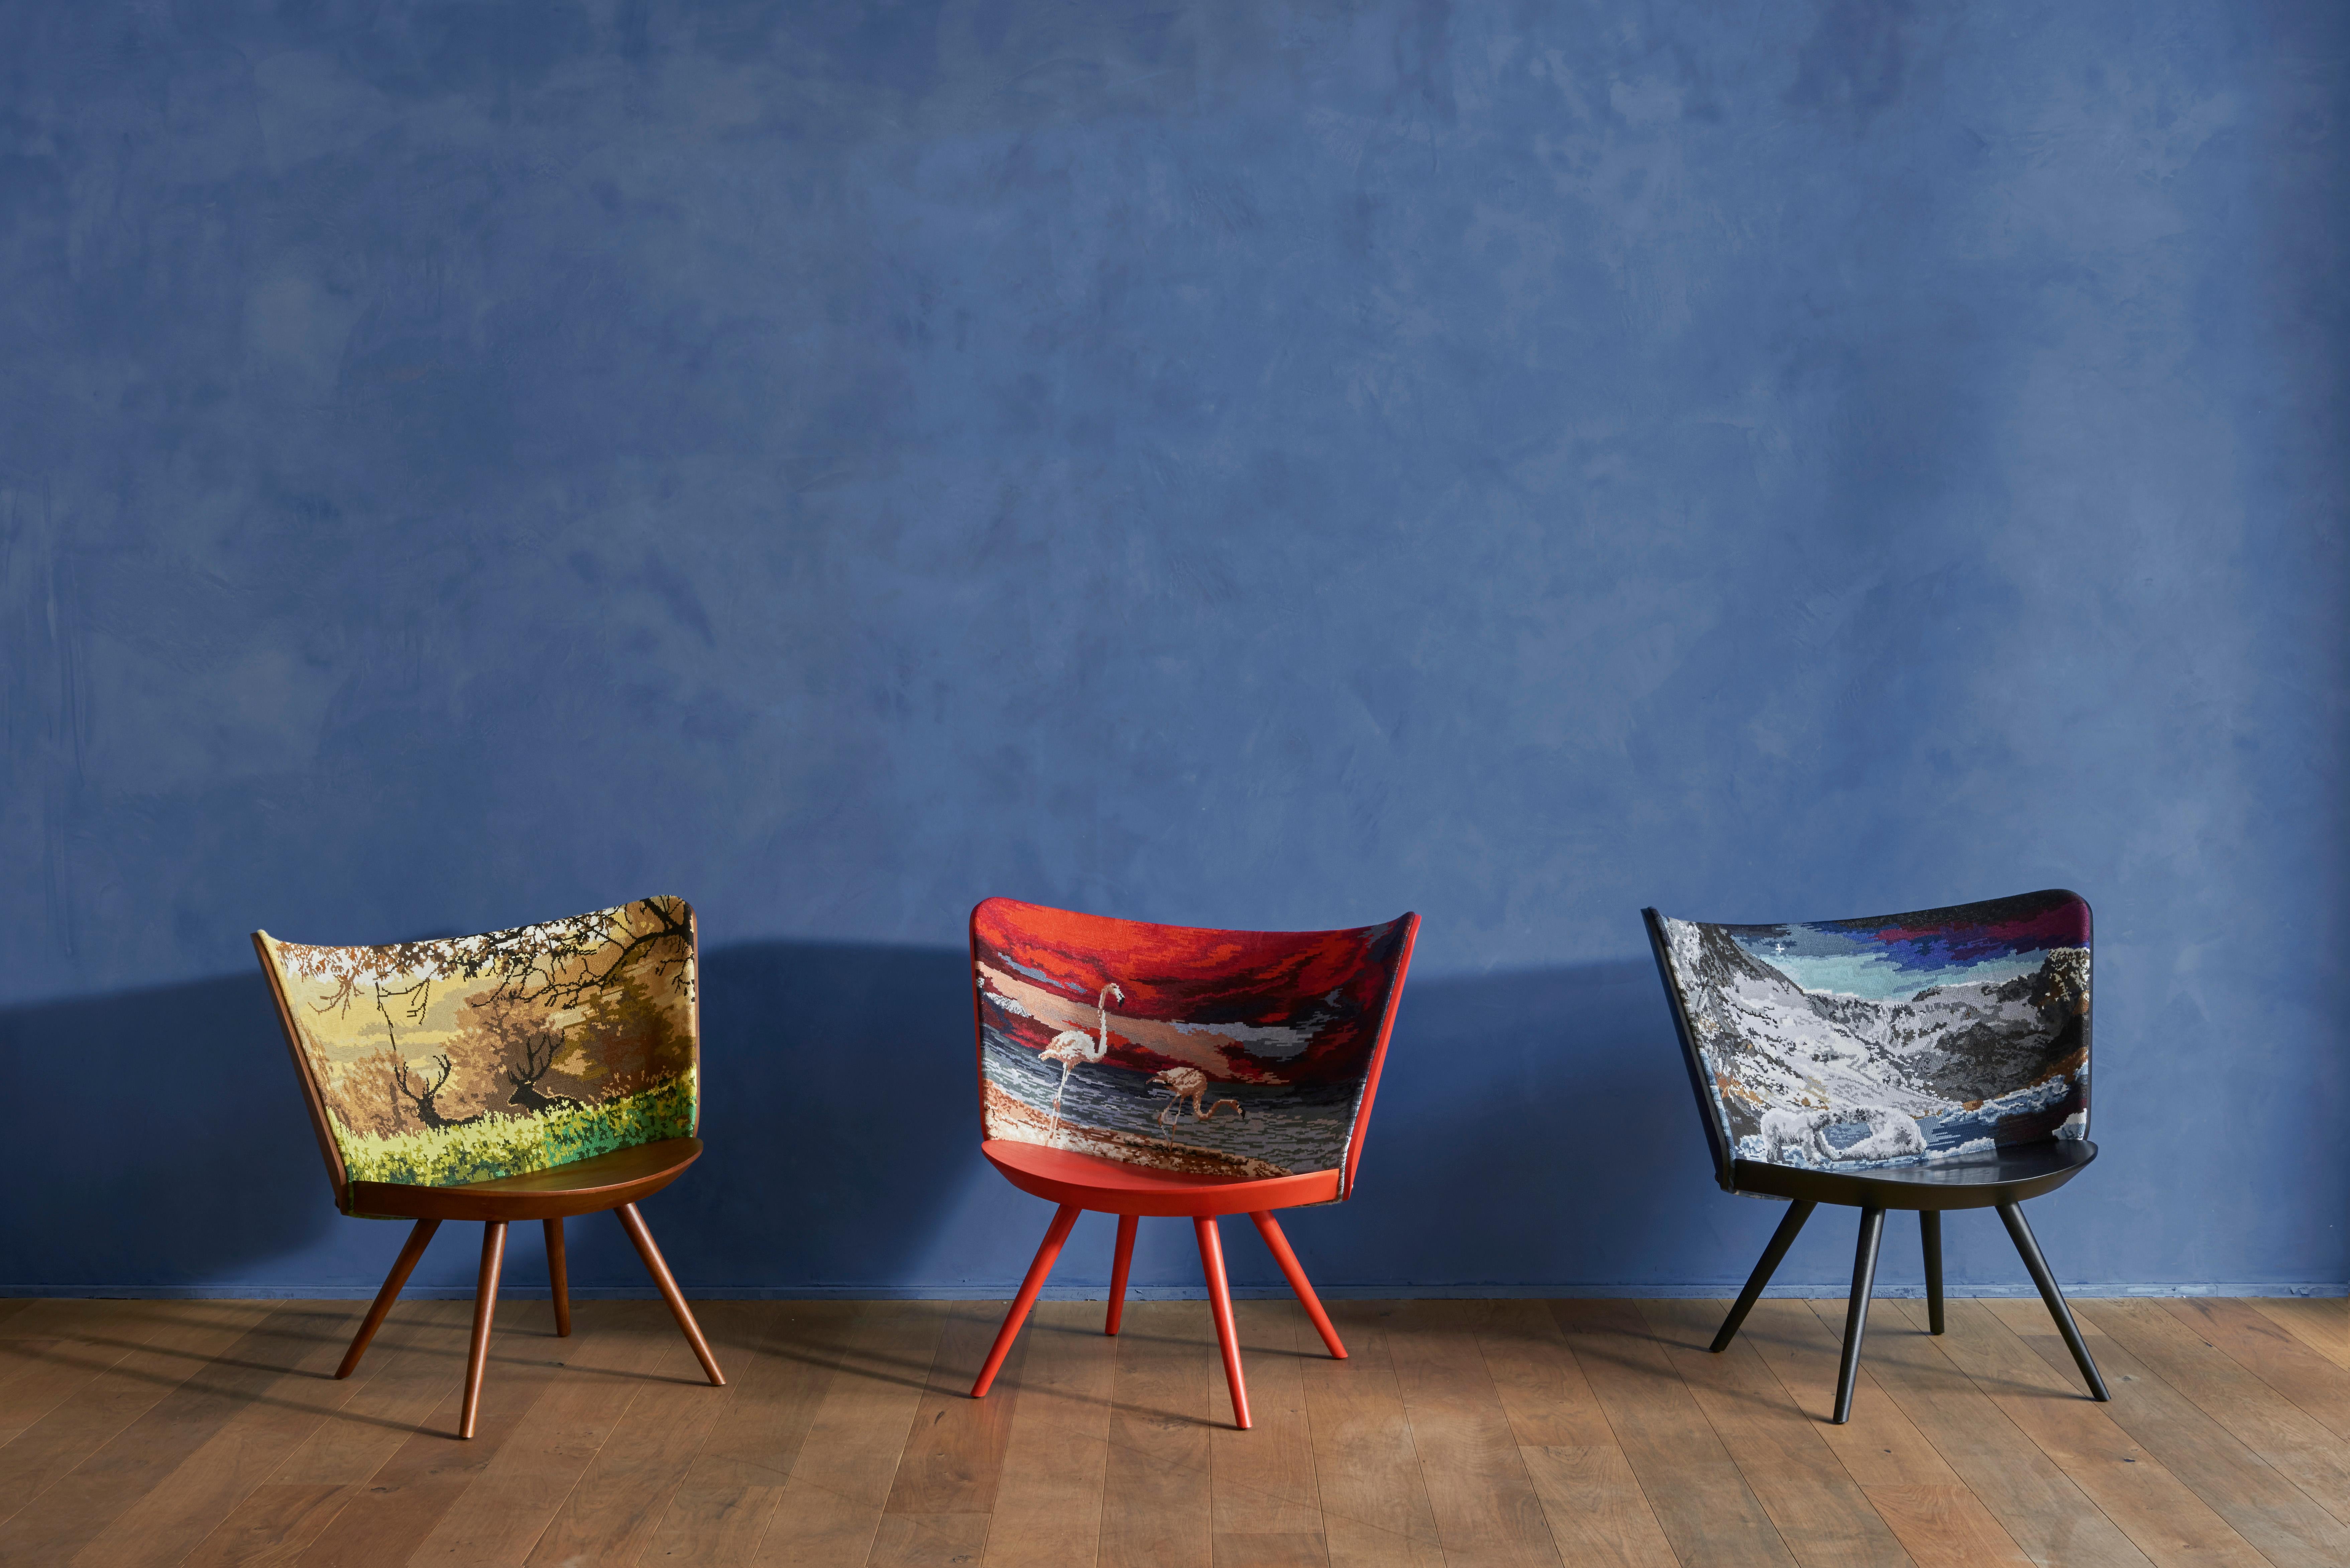 A year-long story. That spans a lifetime. Johan Lindstén captures the beauty of the seasons in autumn, winter, spring, and summer sceneries depicted across the backrest of the poetic Embroidery Chair; cross-stitched, the sublime synthesis between